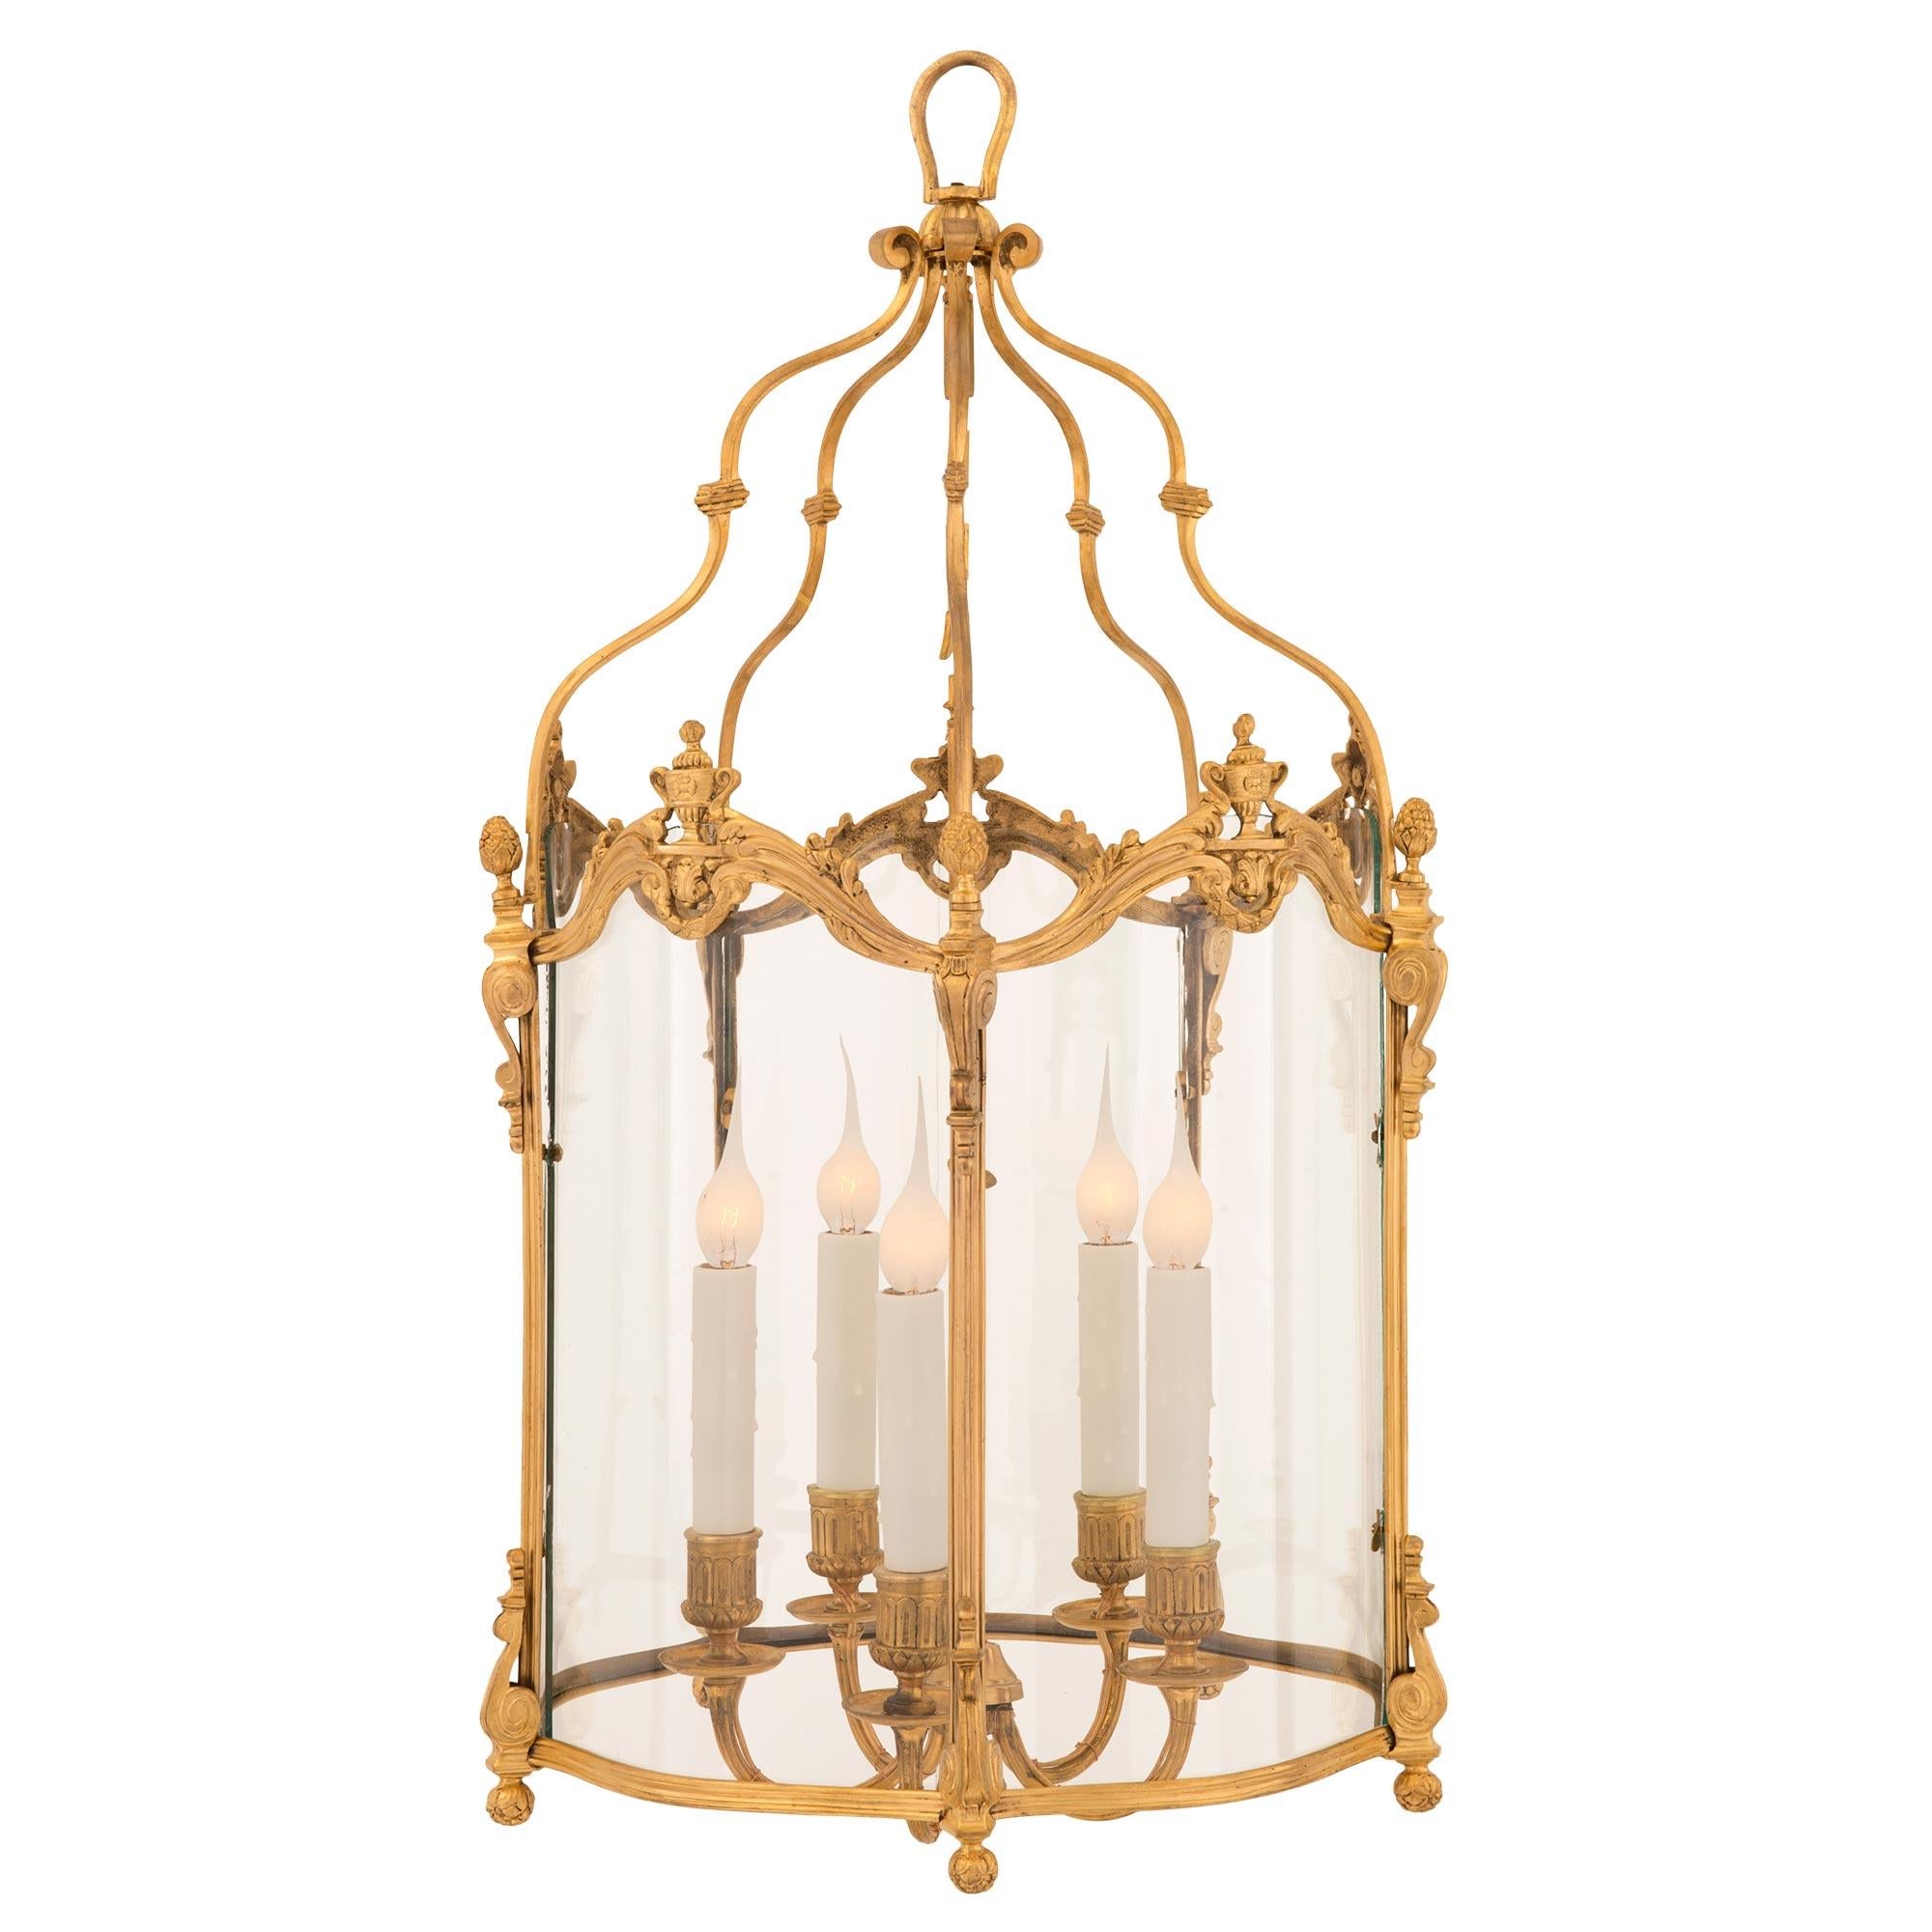 A beautiful French 19th century Louis XVI st. ormolu and glass lantern. The lantern displays five elegantly curved sides retaining their original hand blown glass panes with a lovely ormolu scalloped base and charming richly chased berried foliate